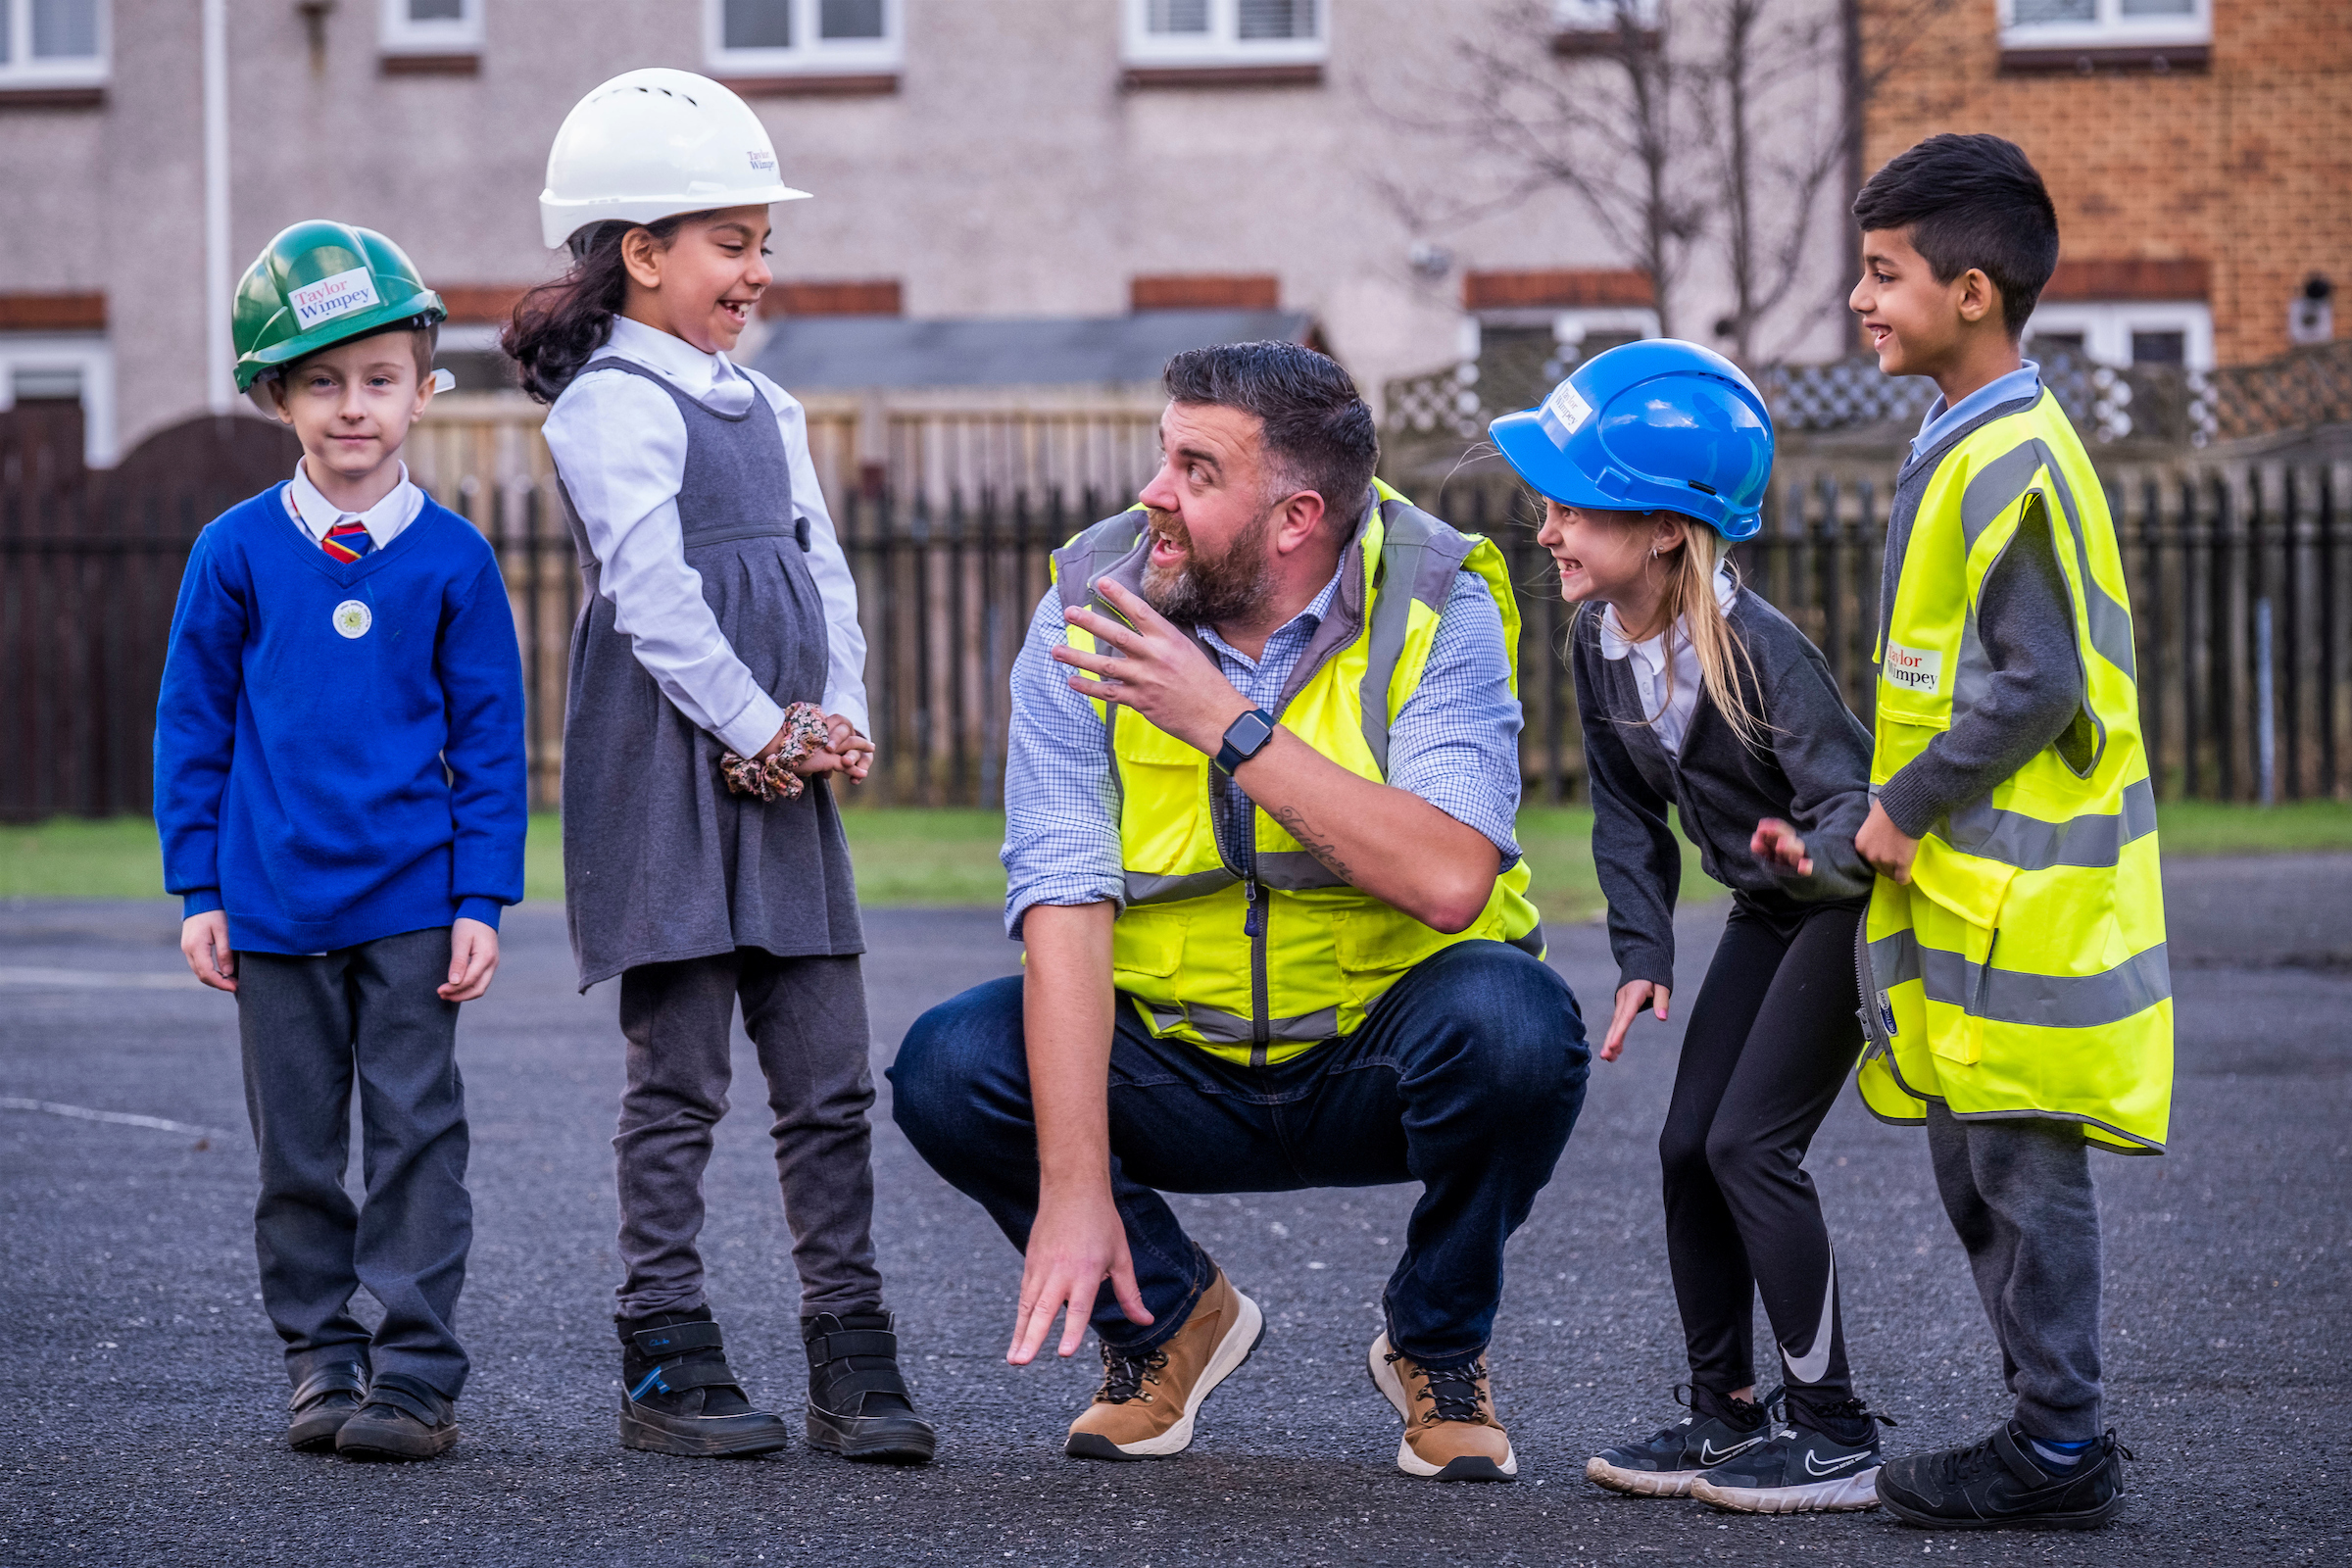 Taylor Wimpey gives lesson in safety to local school children in Renfrew